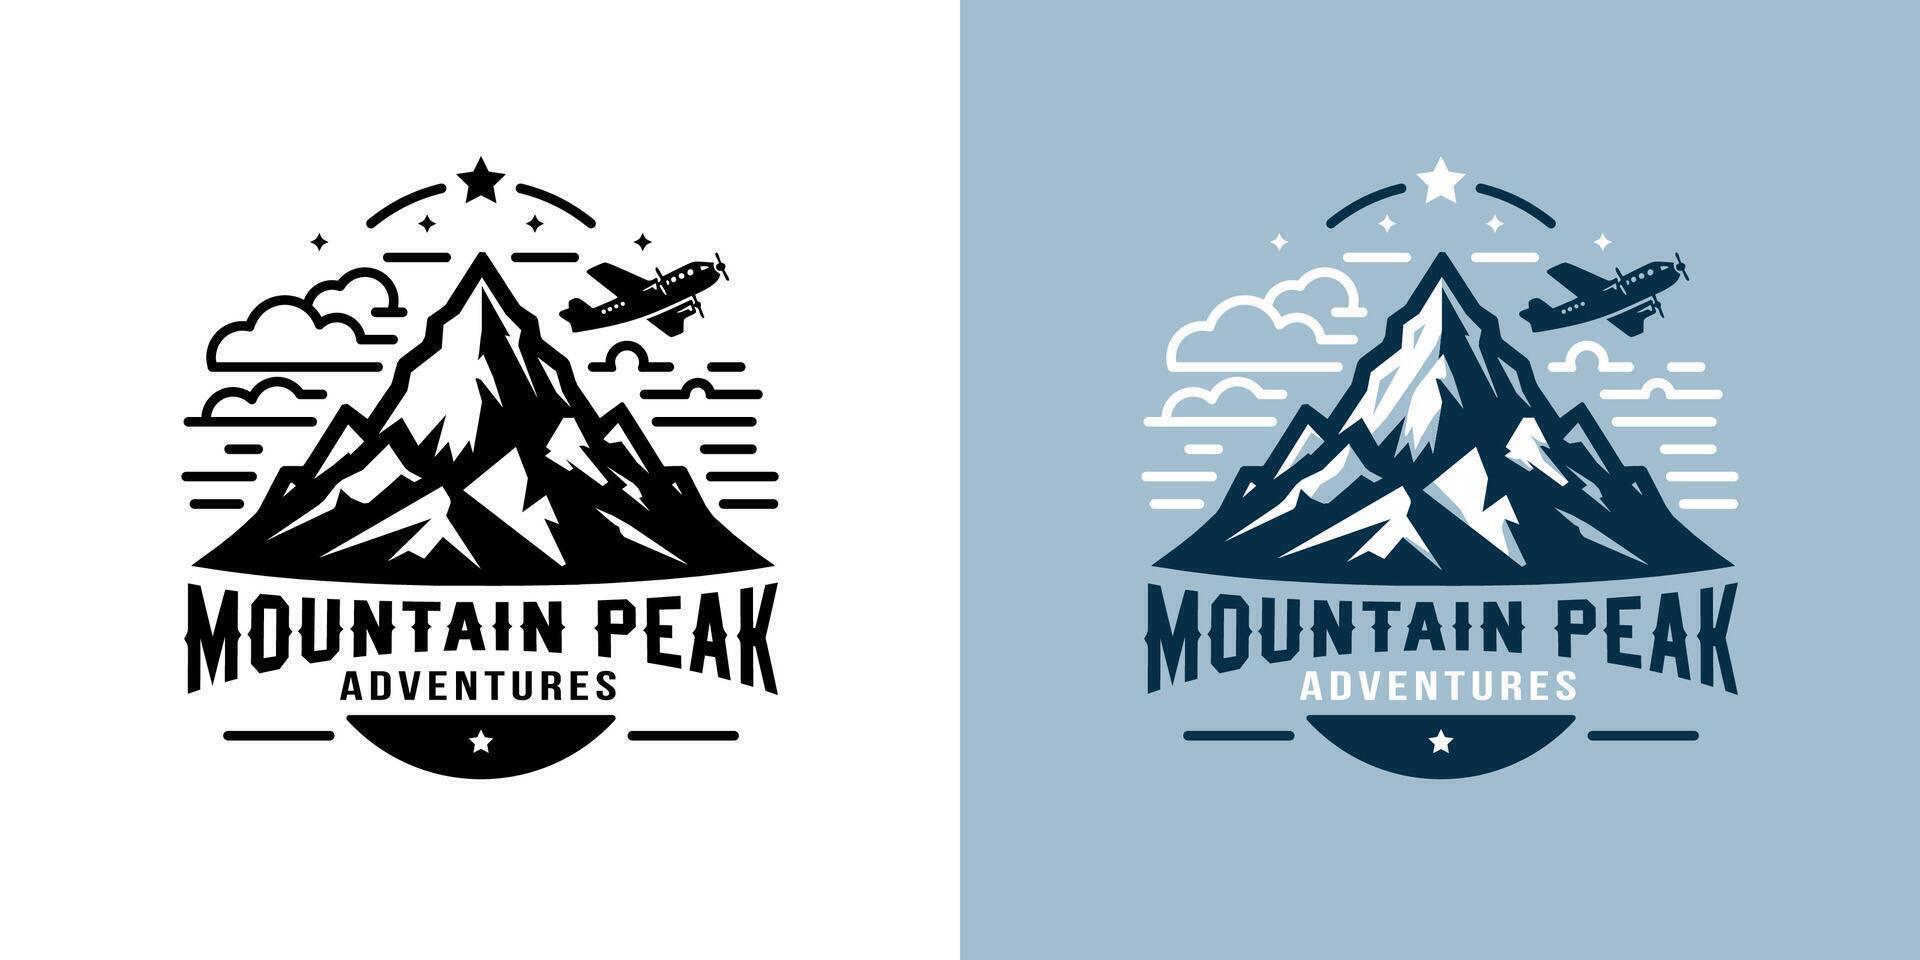 Retro Mountain Badge. Logo for Travel Agencies, Outdoor Companies, Hiking Trips. Emblem for Branding on Backpacks, Mugs, and Souvenirs, Inspiring Hiking vector